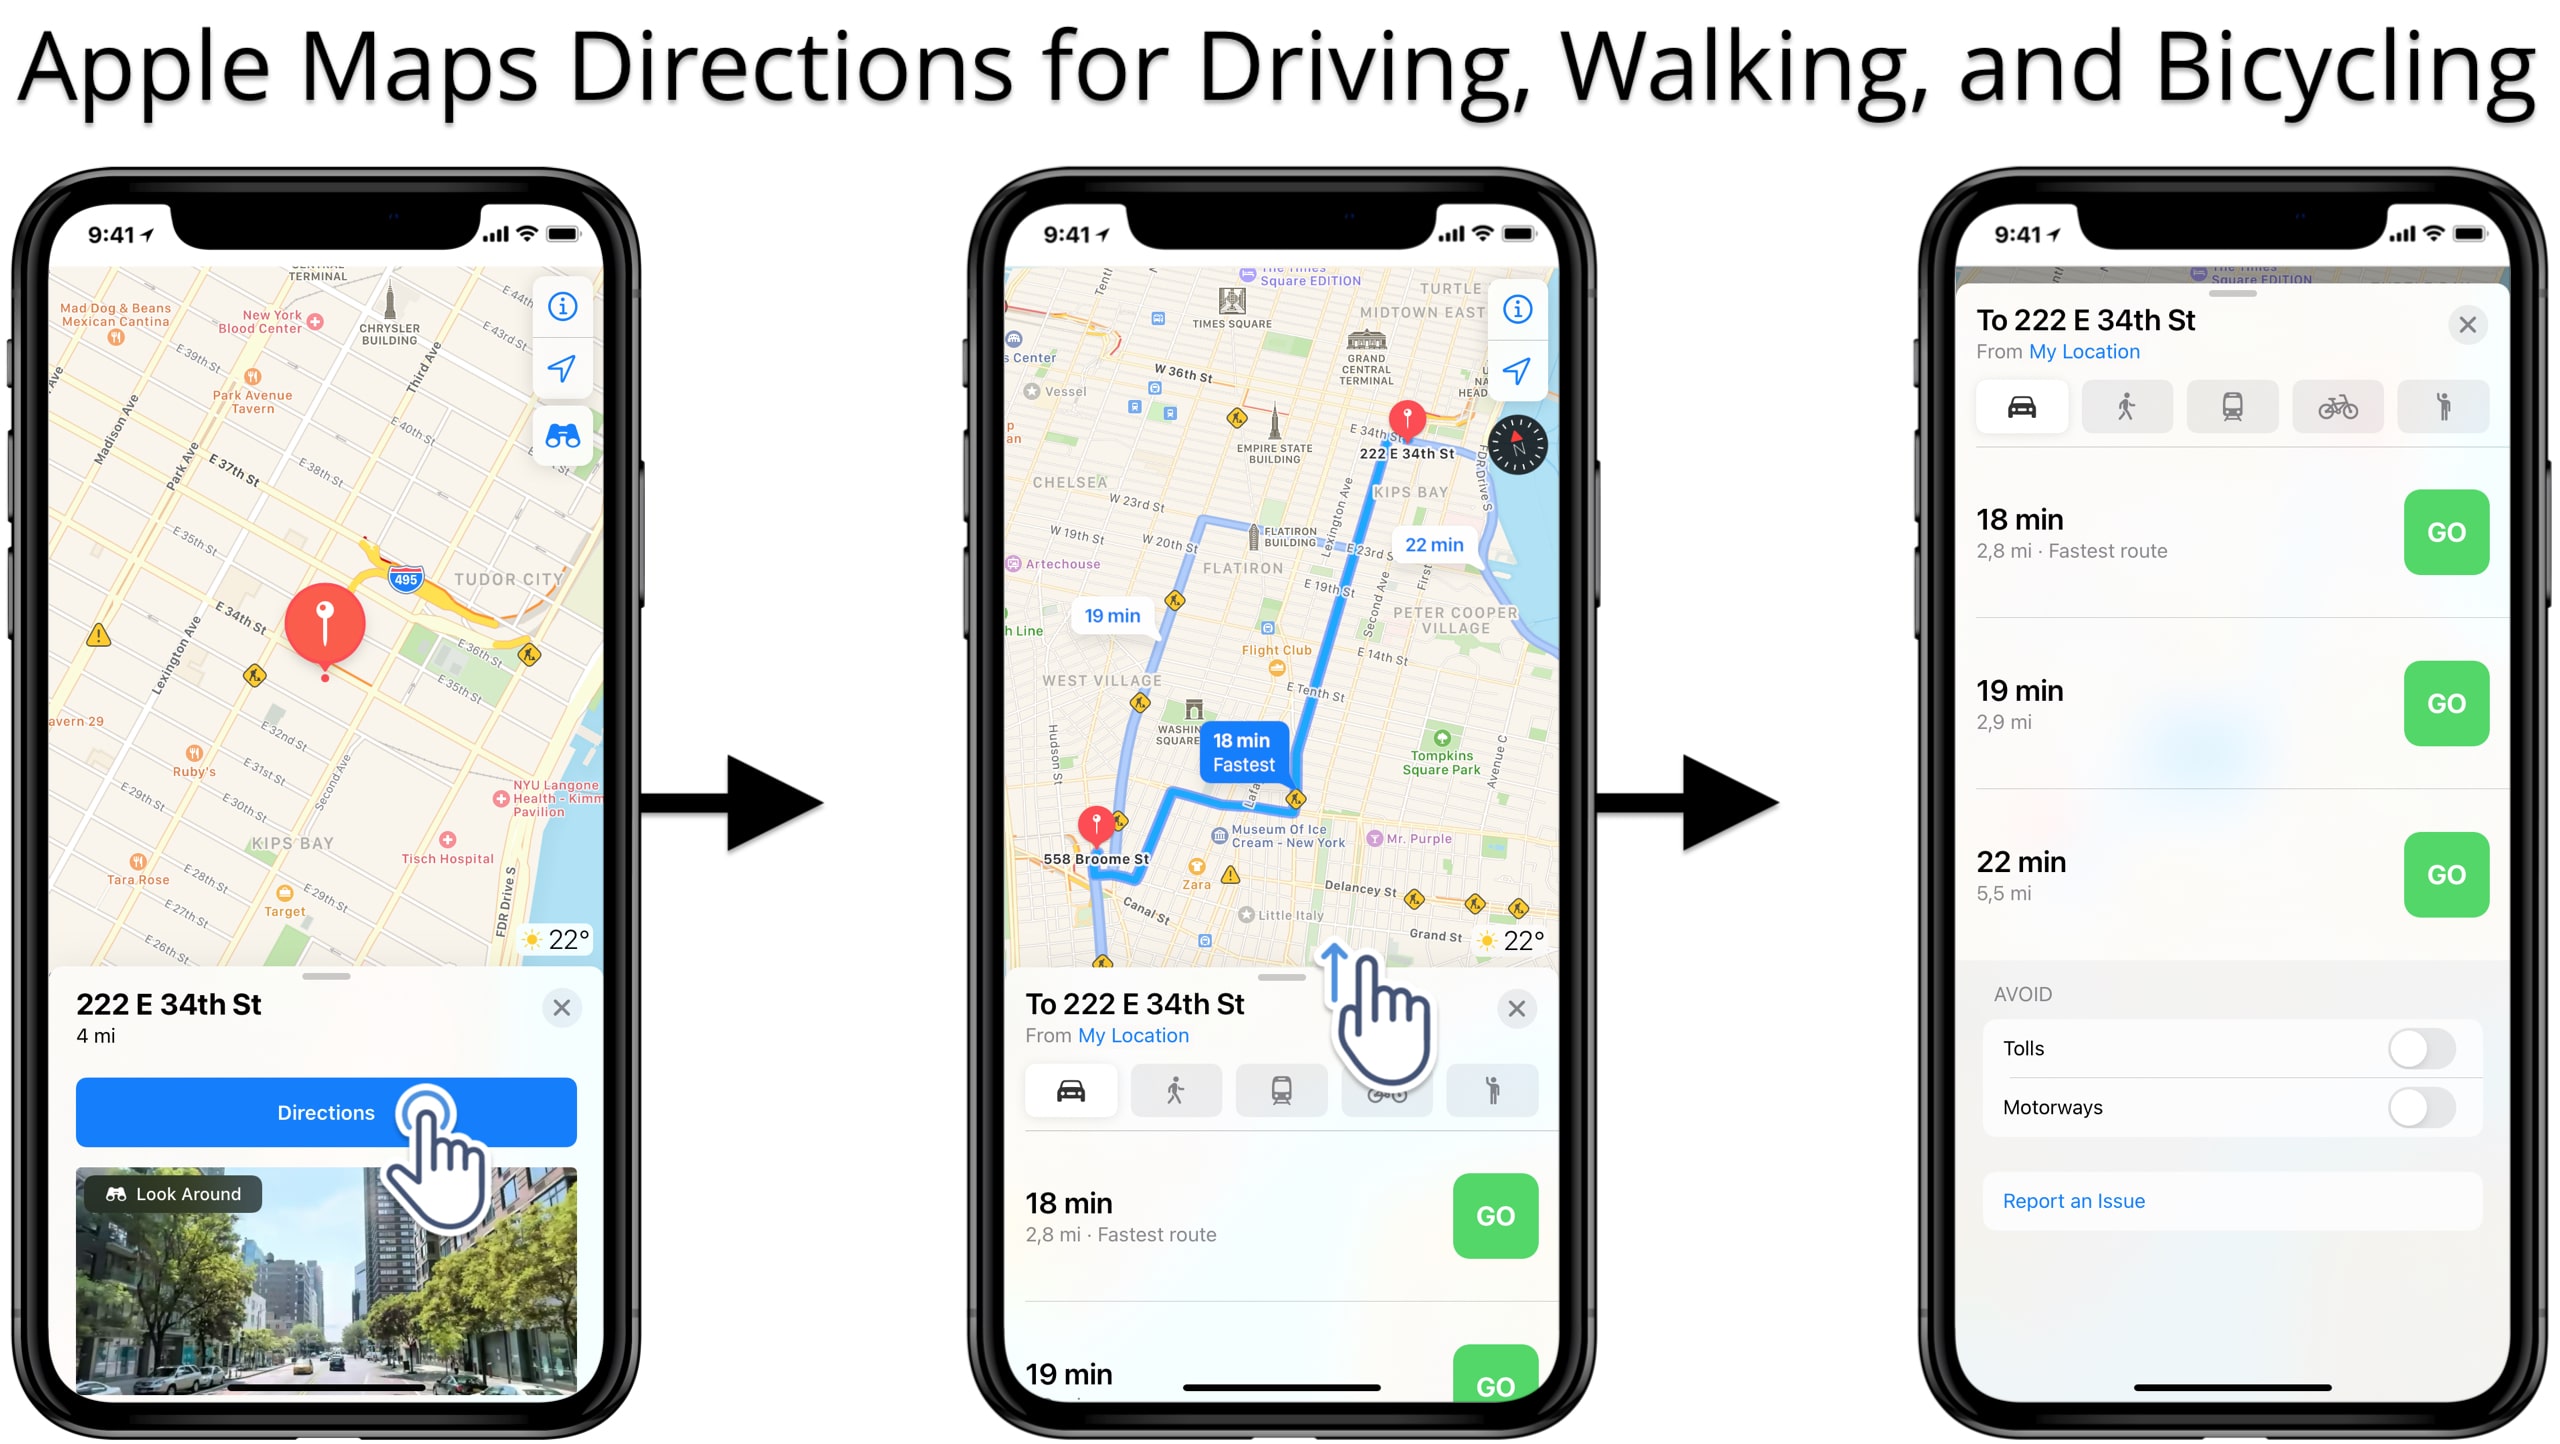 Optimize routes with Apple Maps to get Apple Maps directions for driving, walking, and bicycling.